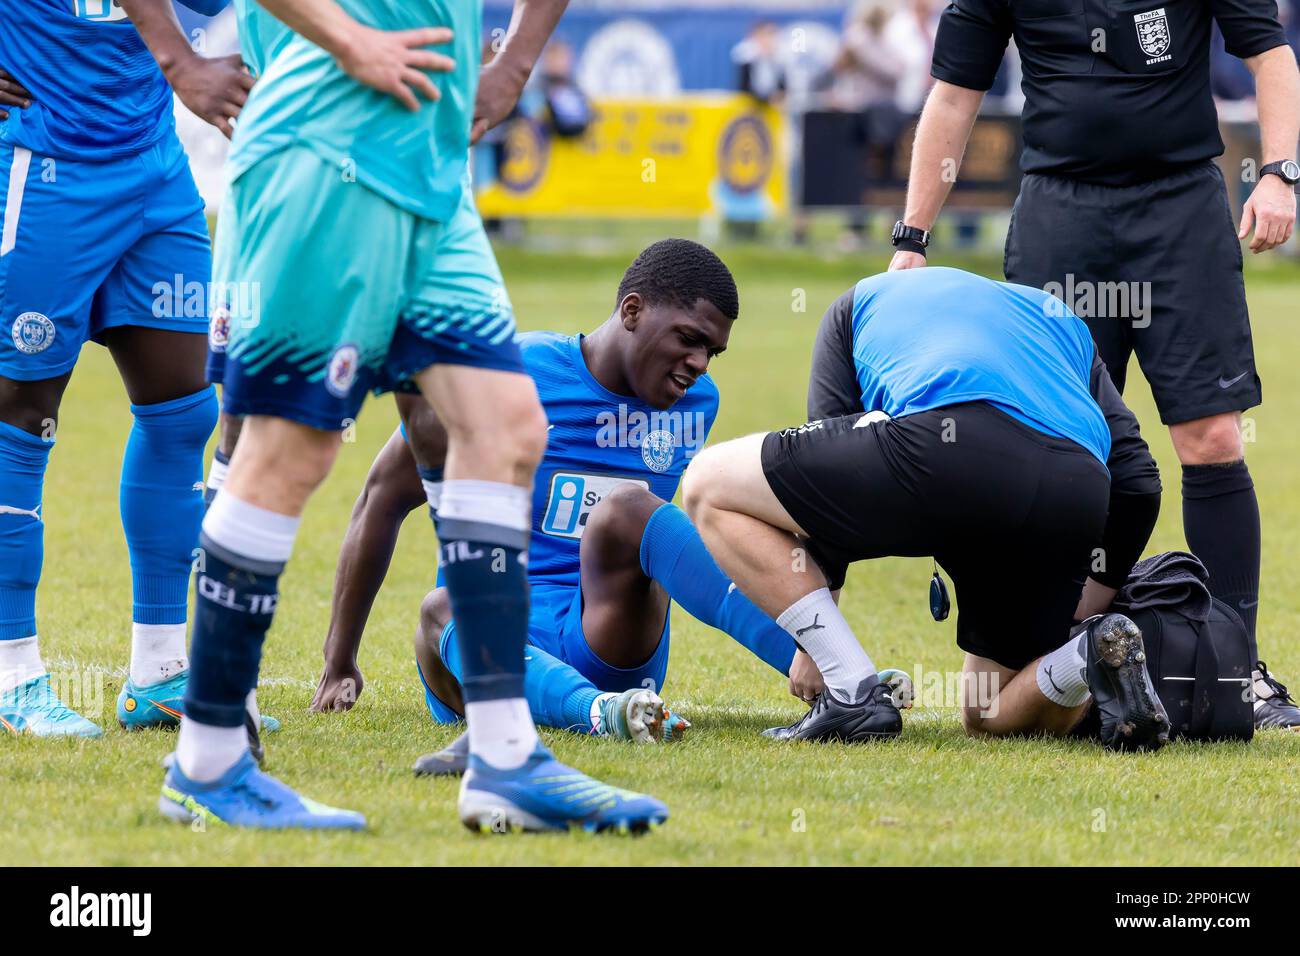 Colin Oppong is treated for an ankle injury during a football match against Stalybridge Celtic at Gorsey Lane, Warrington, Cheshire Stock Photo